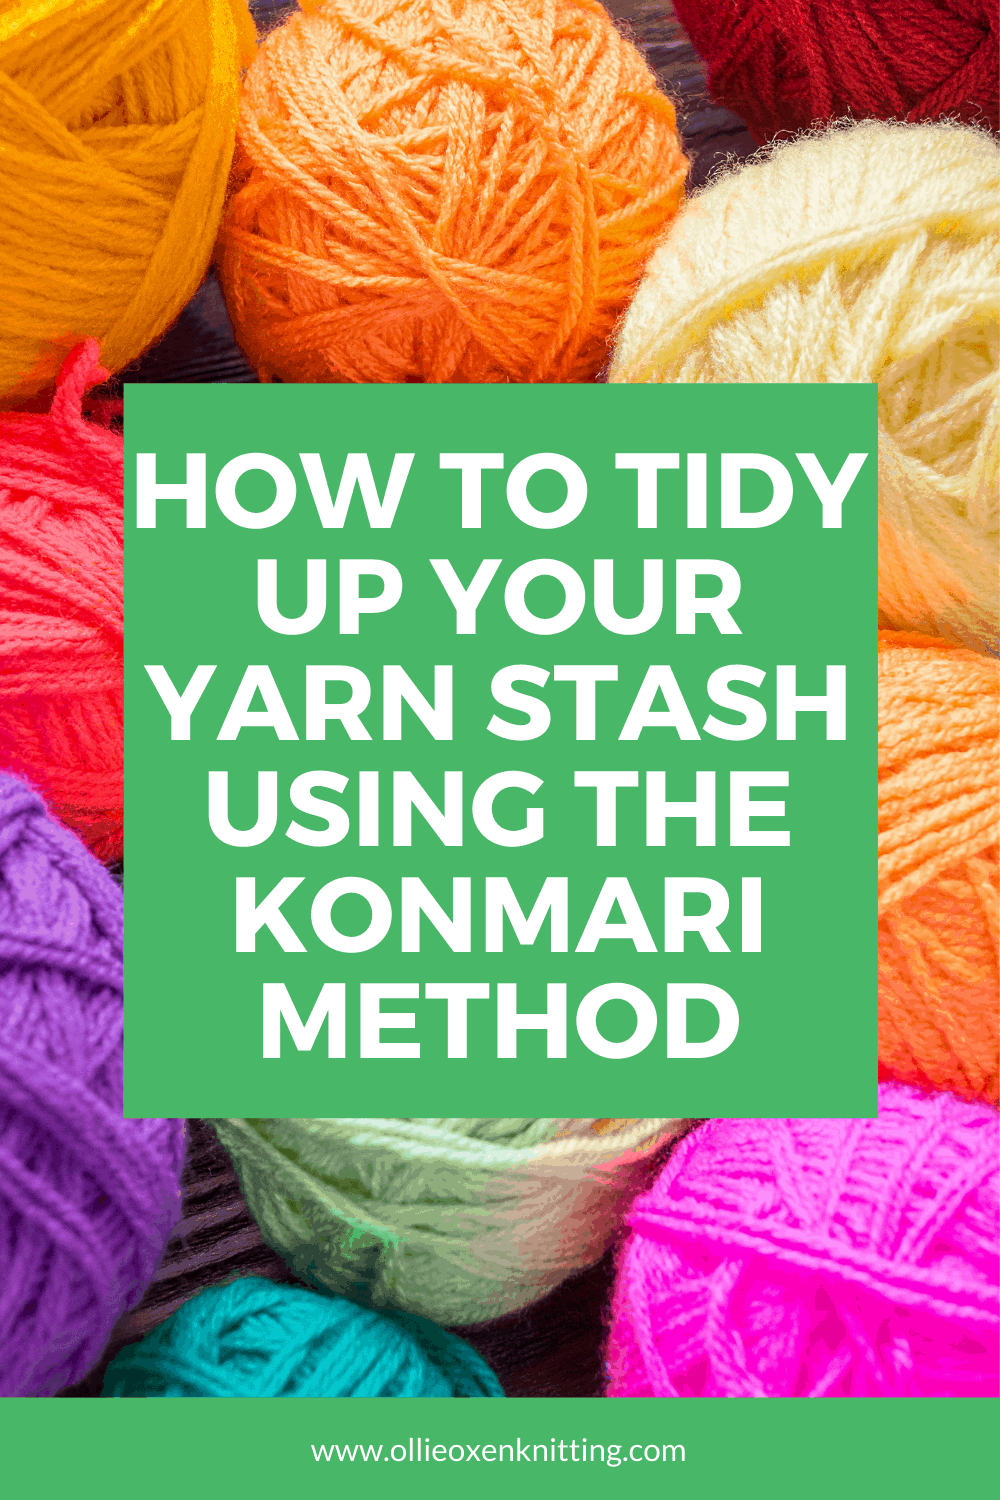 How To Tidy Up Your Yarn Stash Using The KonMari Method | Ollie Oxen Knitting